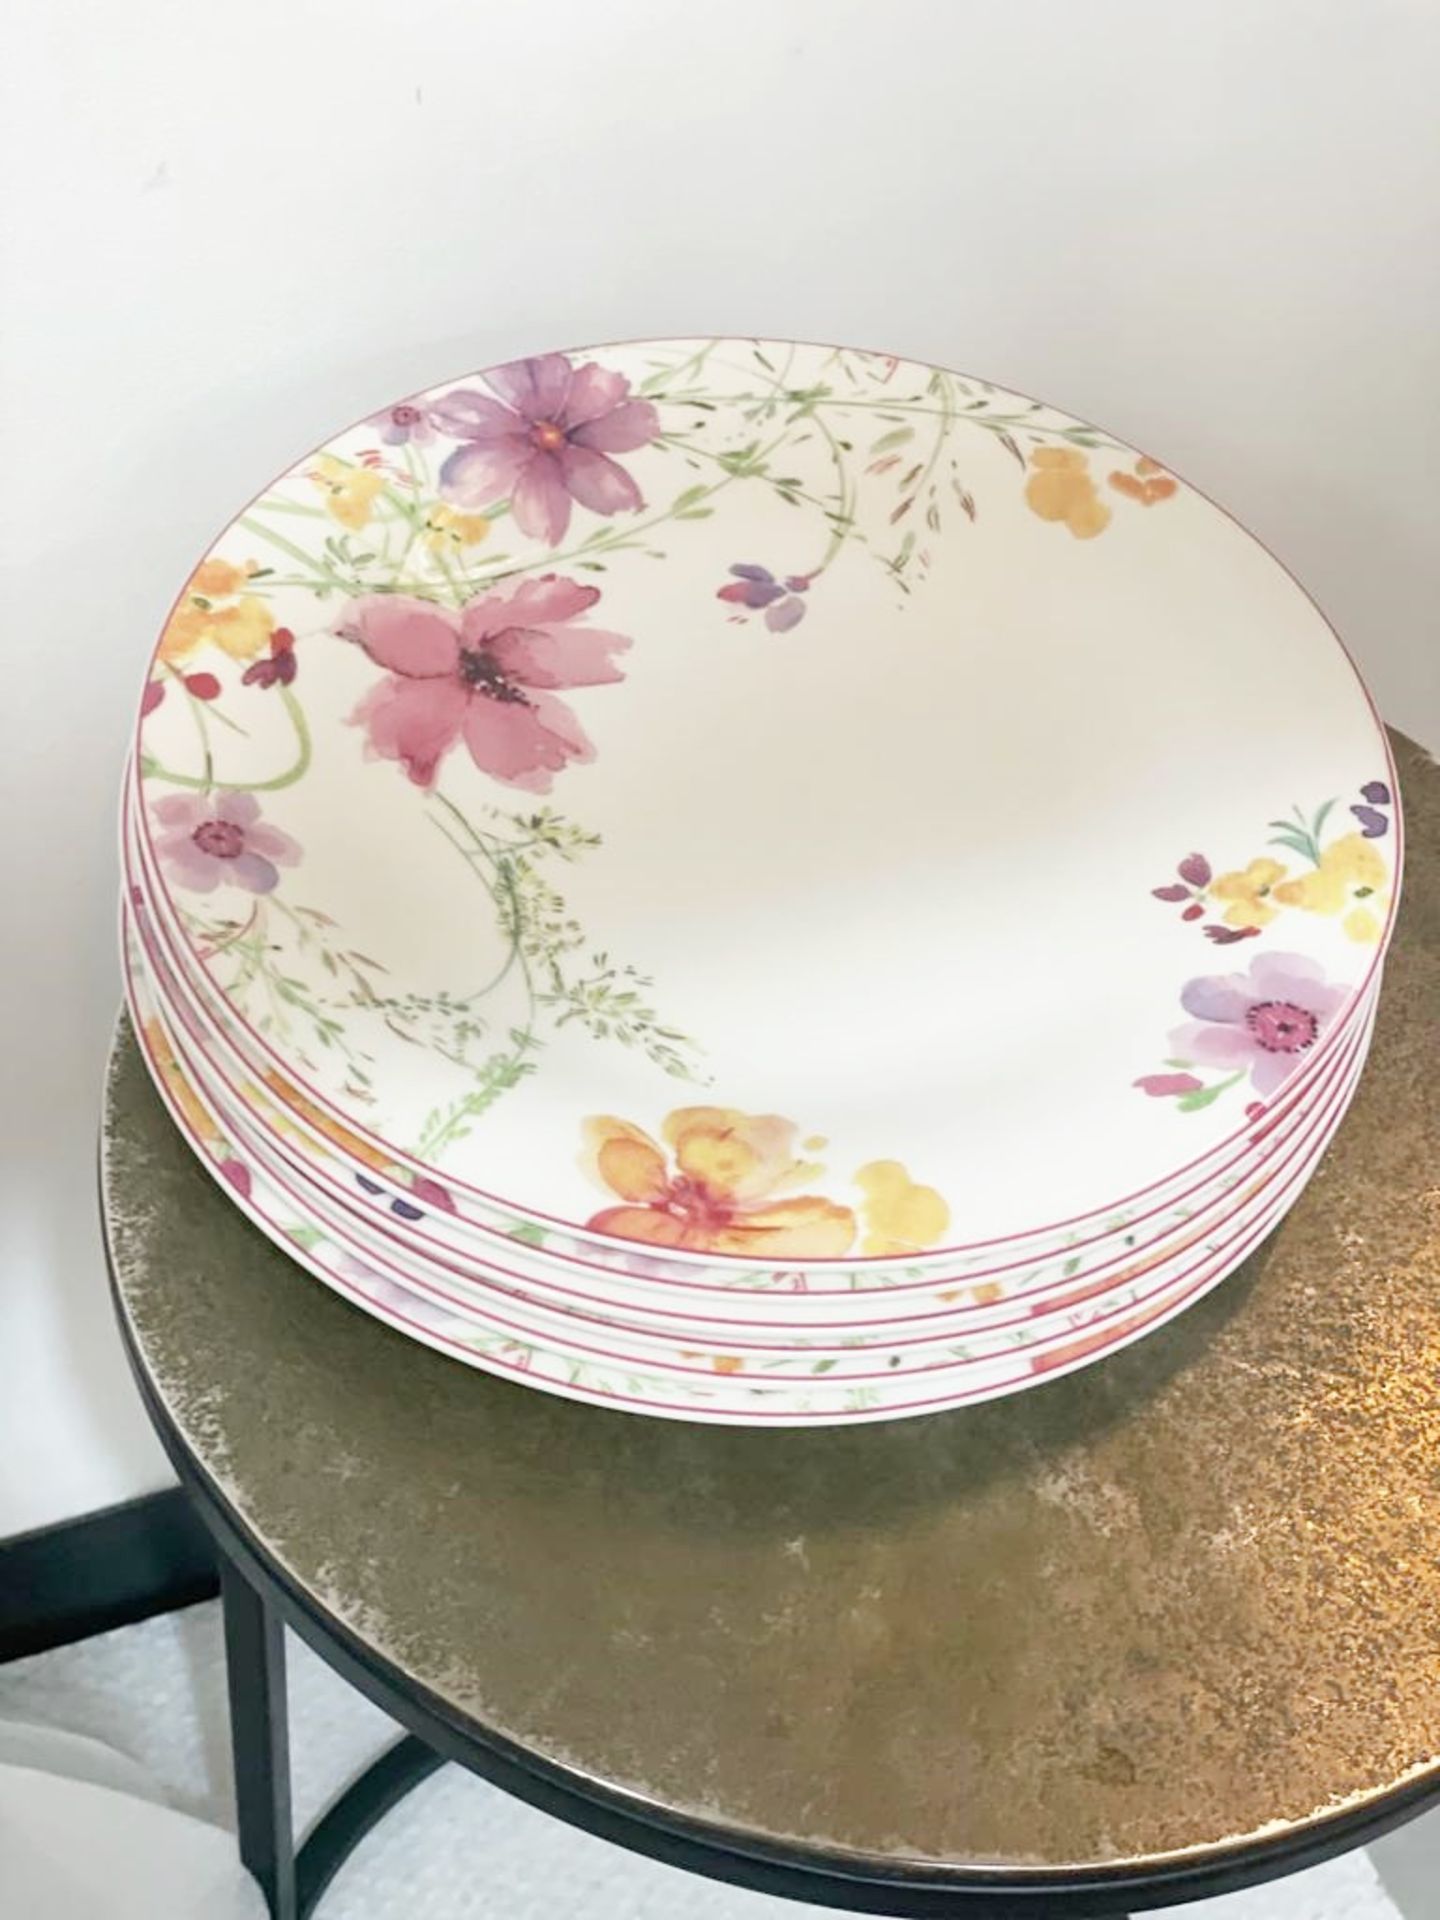 17 x Assorted Of Villeroy And Boch Floral Plates - Ref: AUR157  - NO VAT ON THE HAMMER - CL652 - - Image 4 of 5